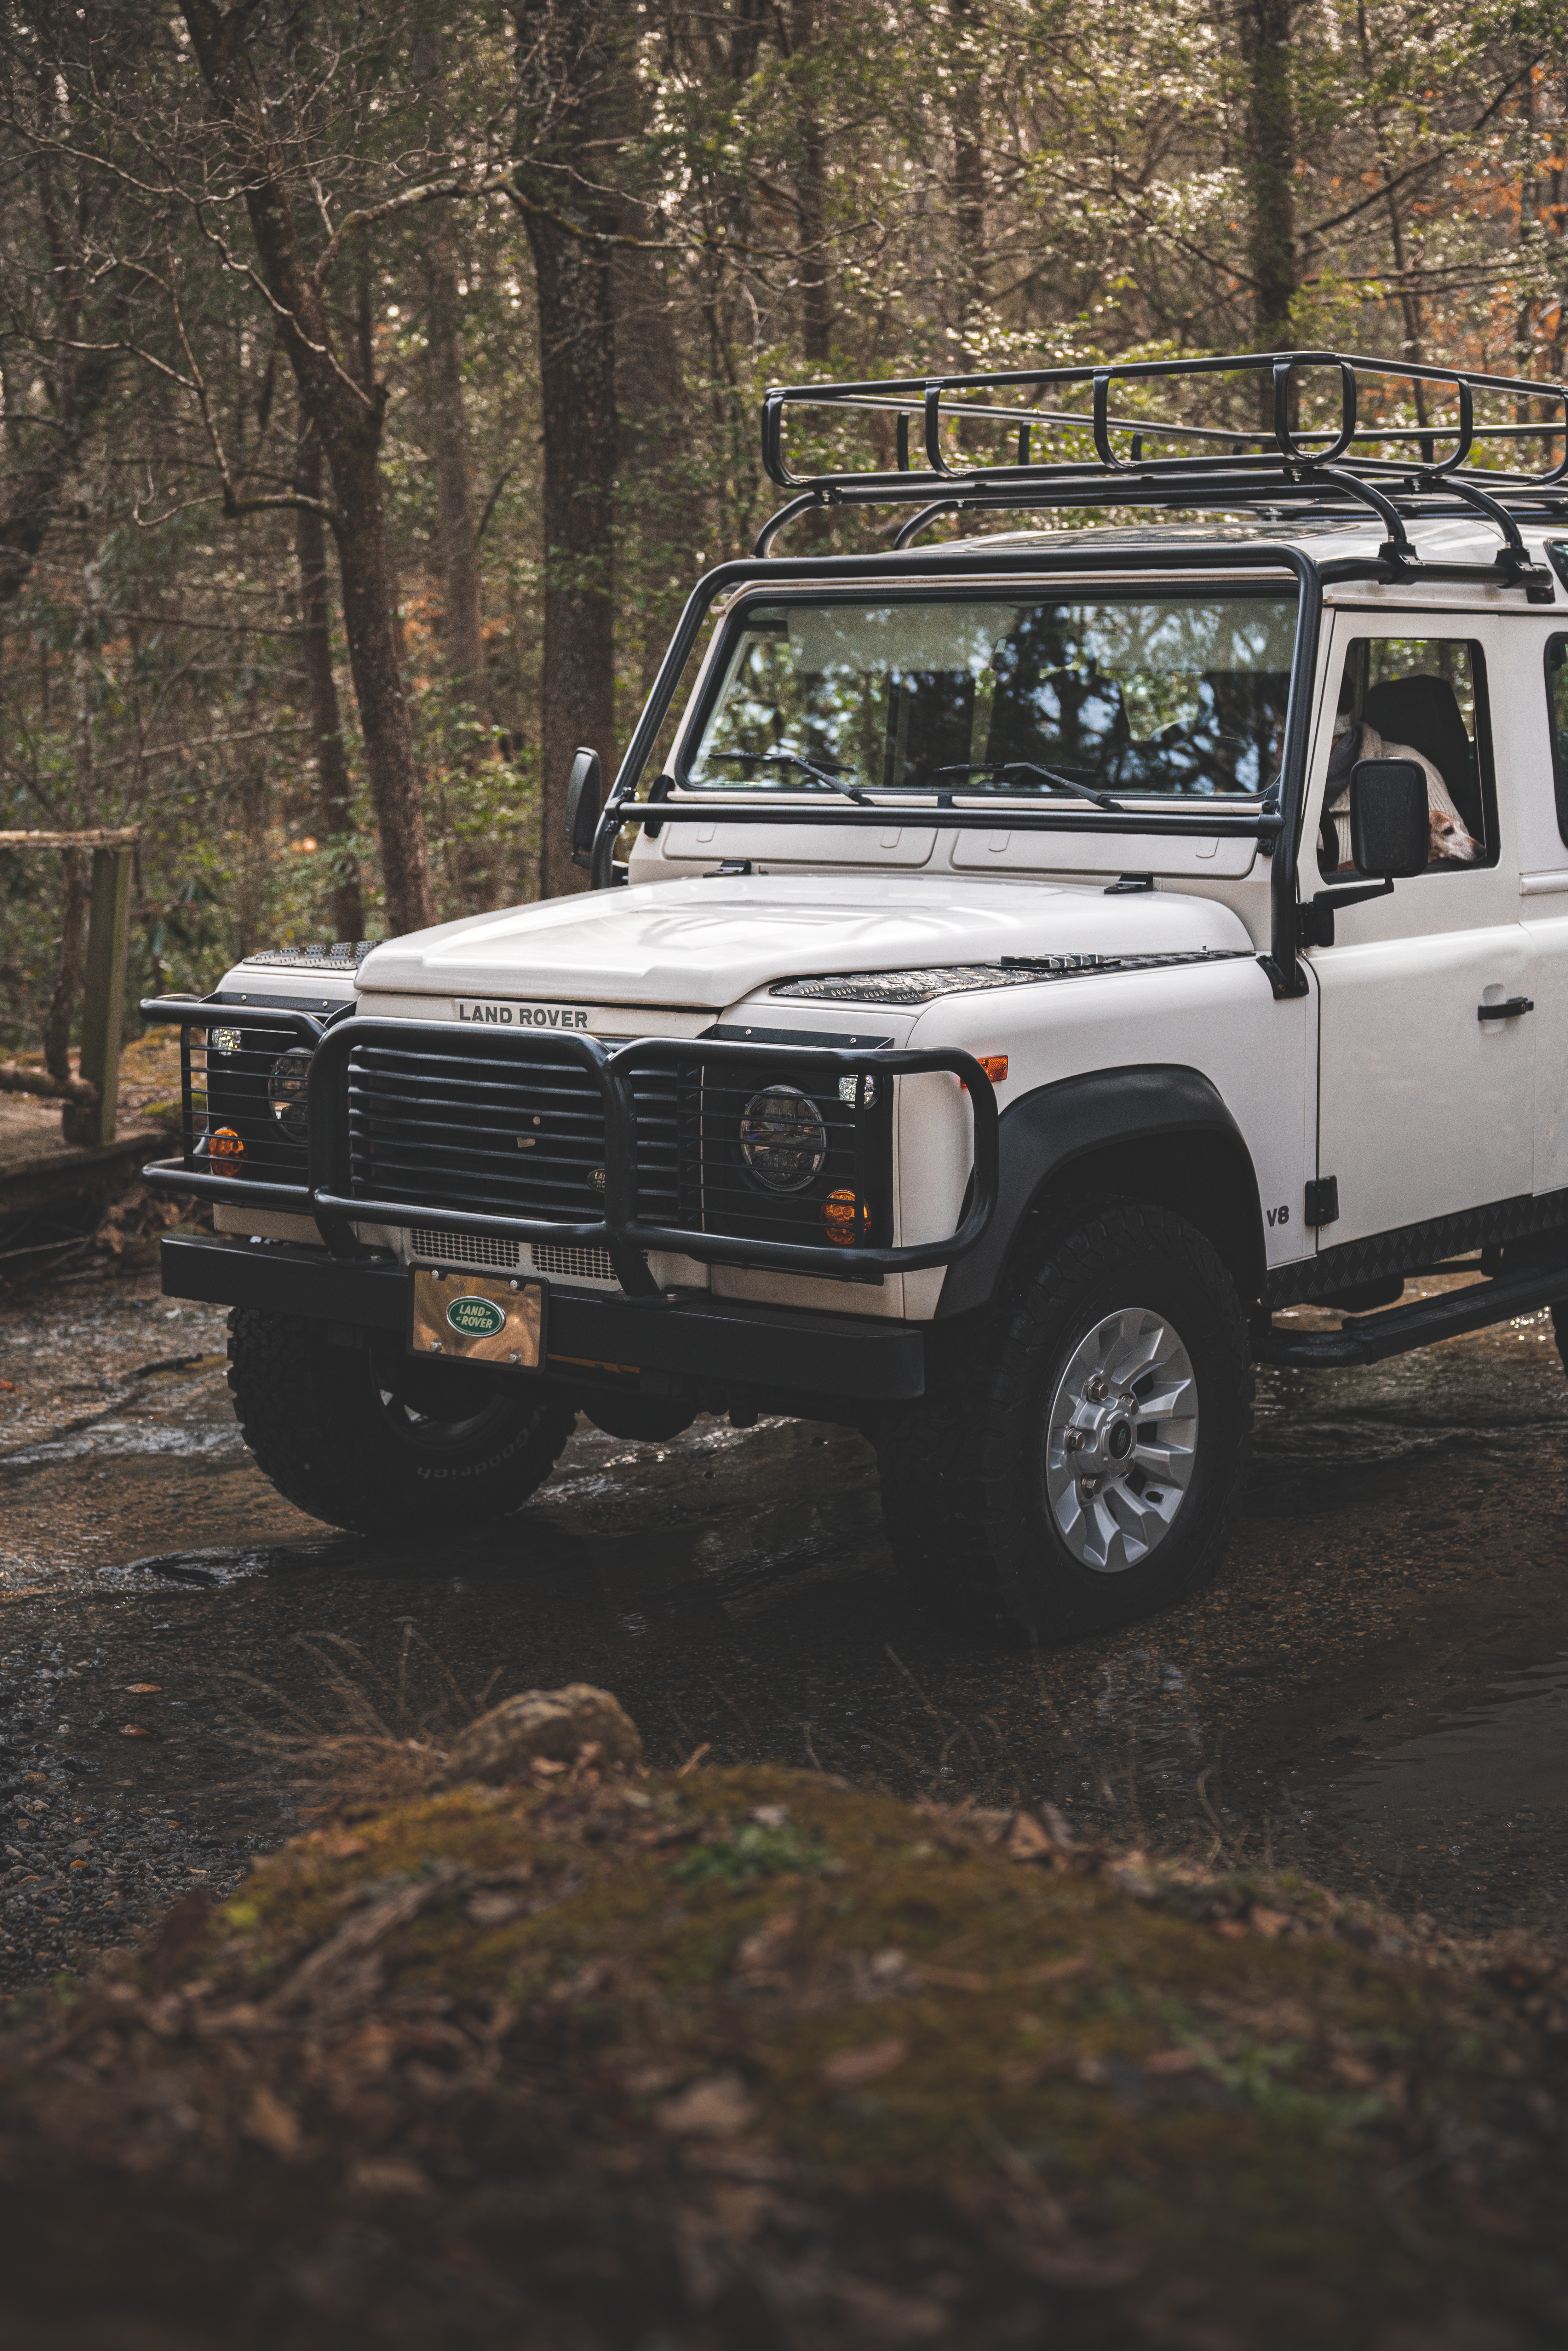 land rover defender, machine, land rover, cars, white, car, suv, jeep